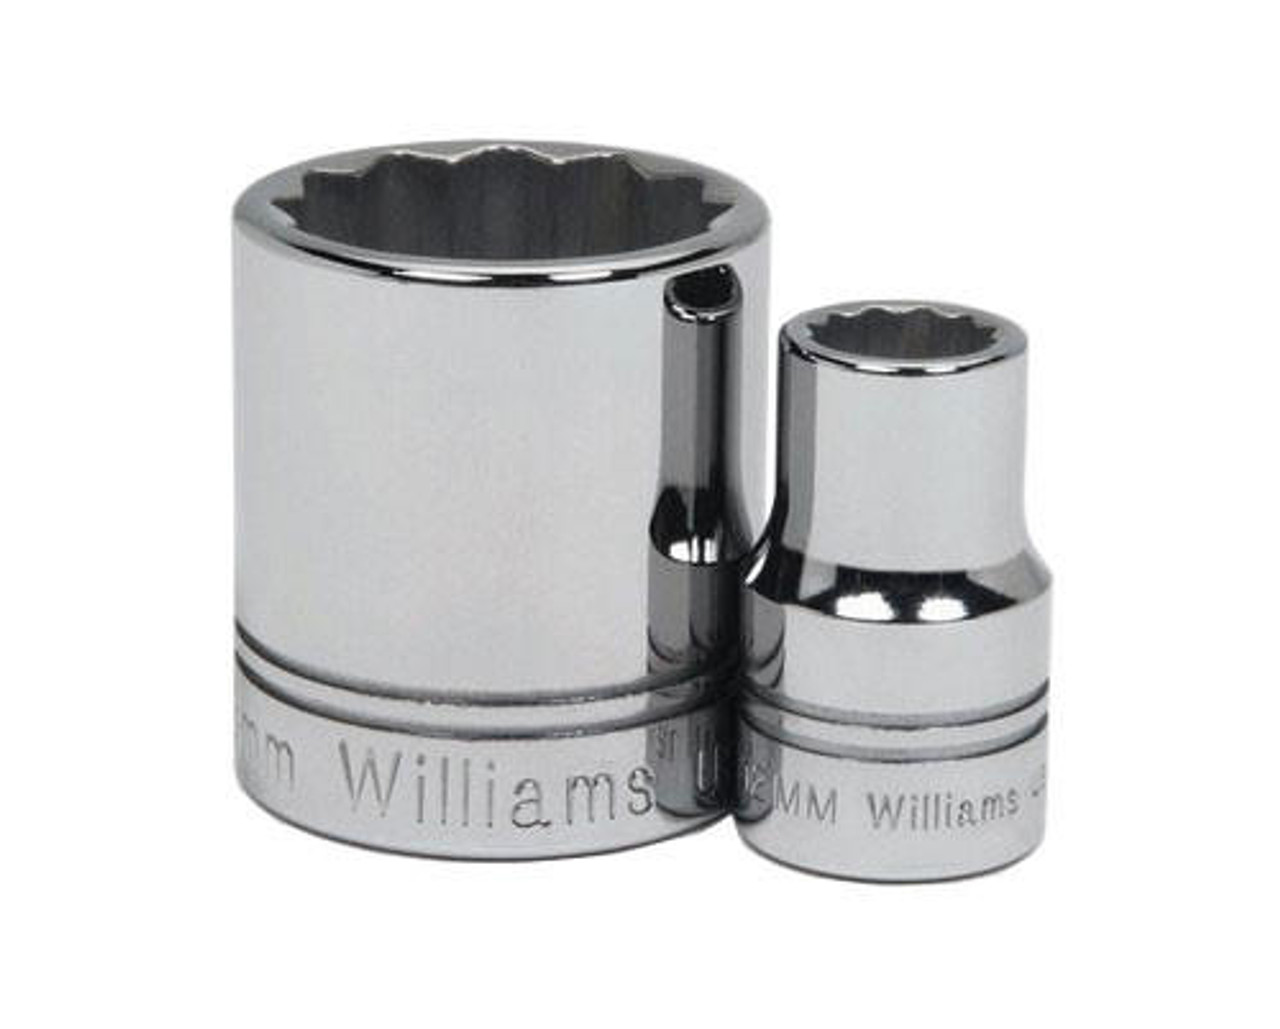 Williams Made In USA 27MM Williams 1/2" Dr Shallow Socket 12 Pt - STM-1227 